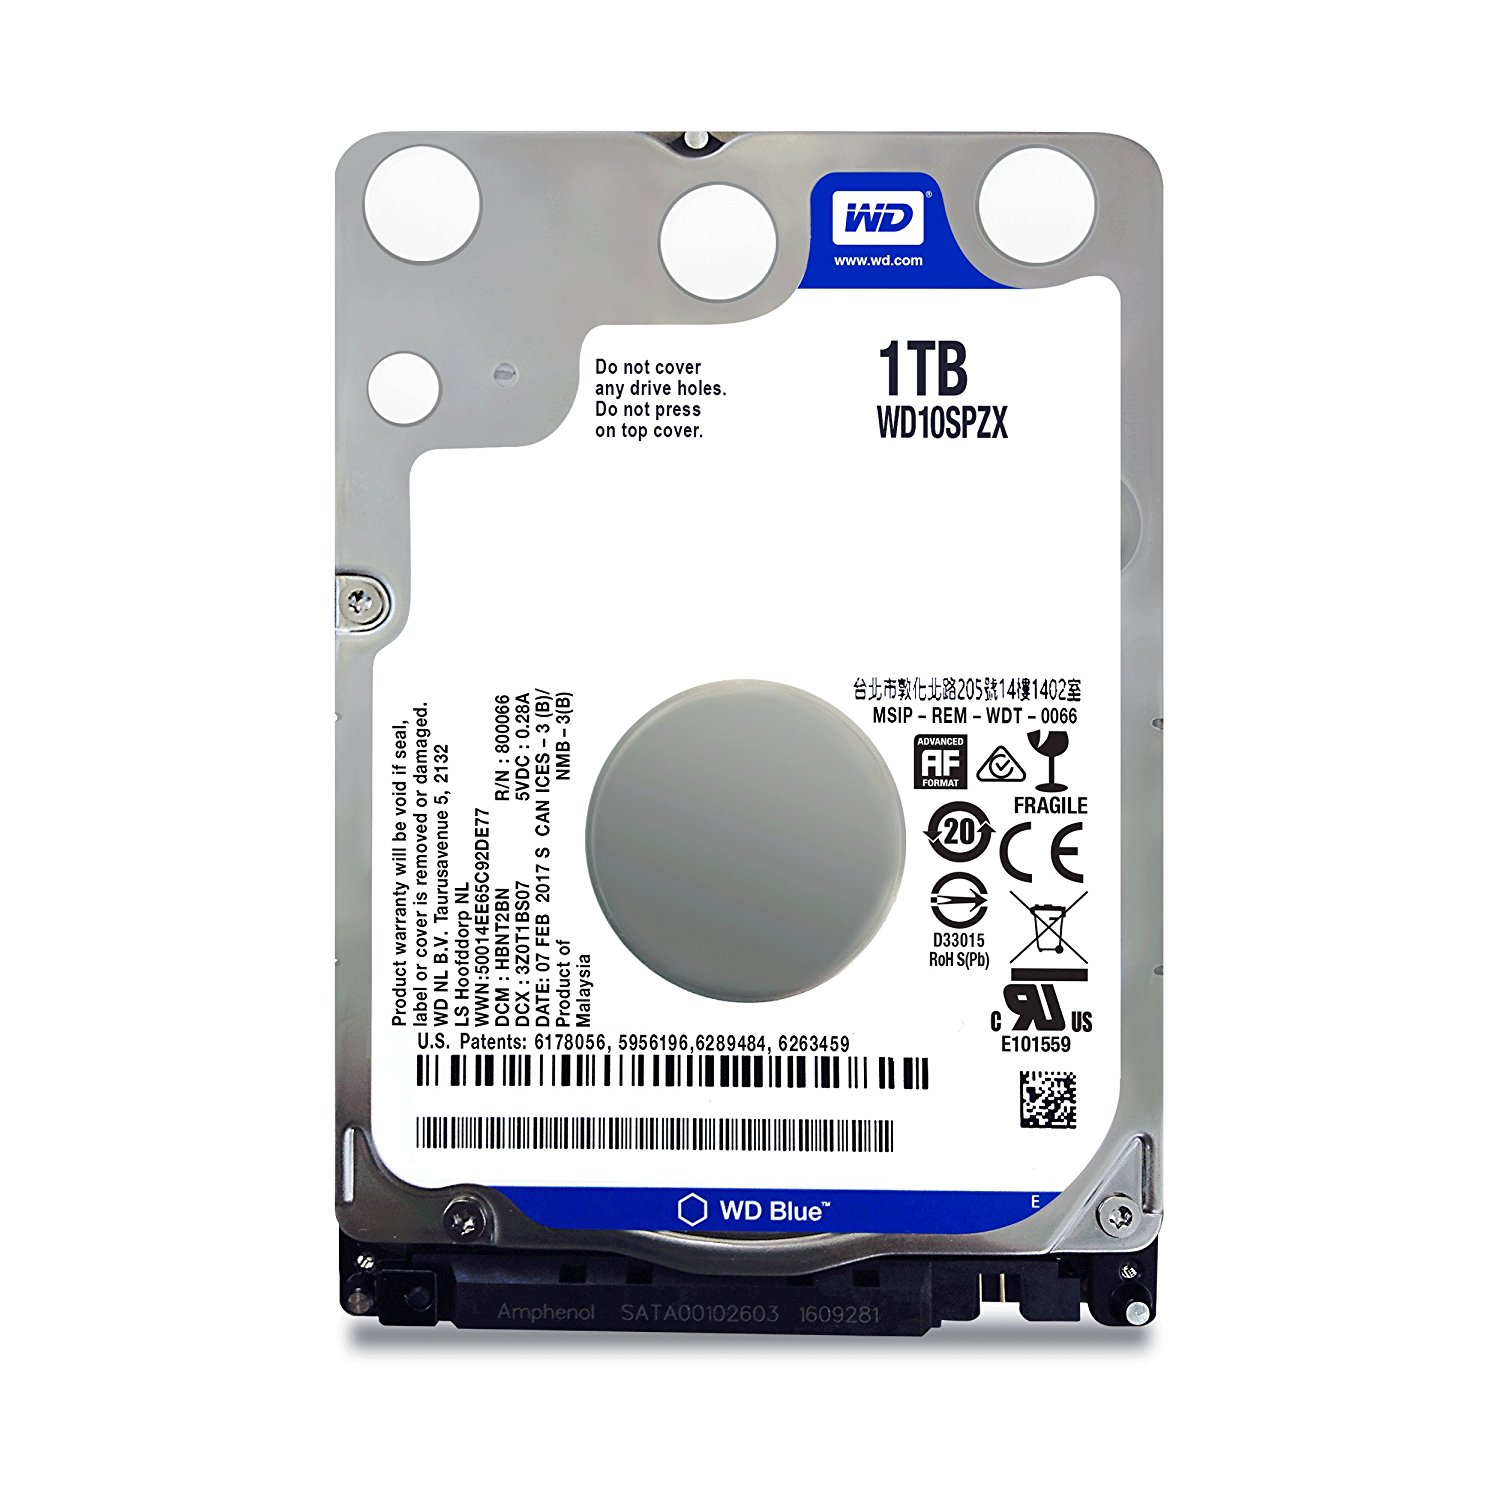 MeterMall New PC Hard Drive HDD 5400rpm Cache for SATA 2.5 Laptop Hard Drive 120GB 